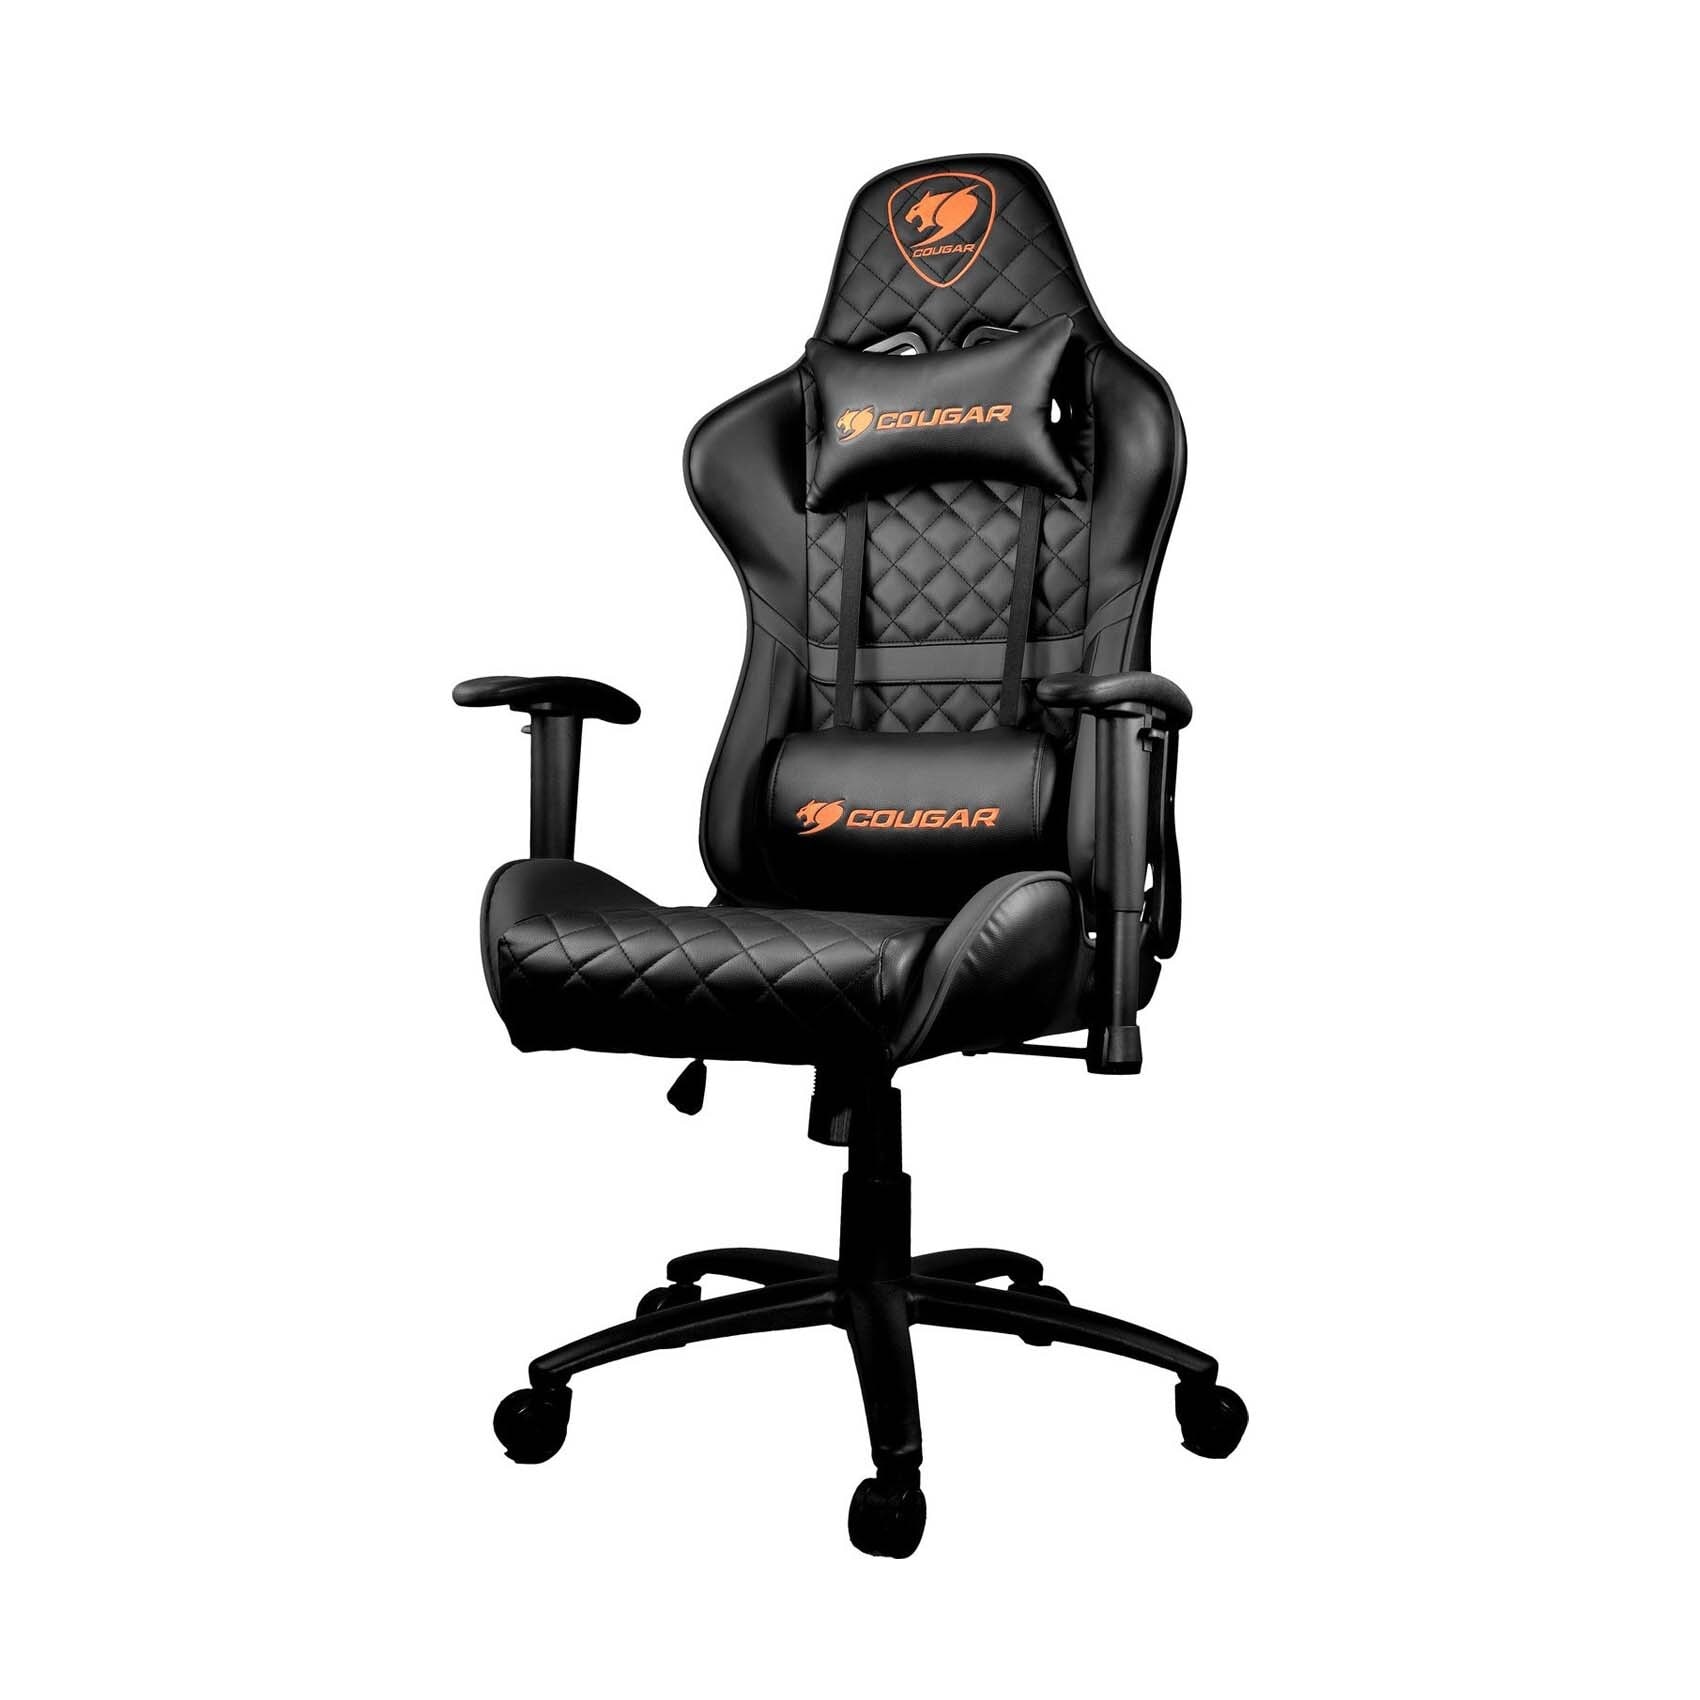 Cougar Armor Titan Pro Gaming Chair #cougar #armor #gaming #chair #comfort  #player #pro #bluelynx #online #ecommerce #qatar #doha…